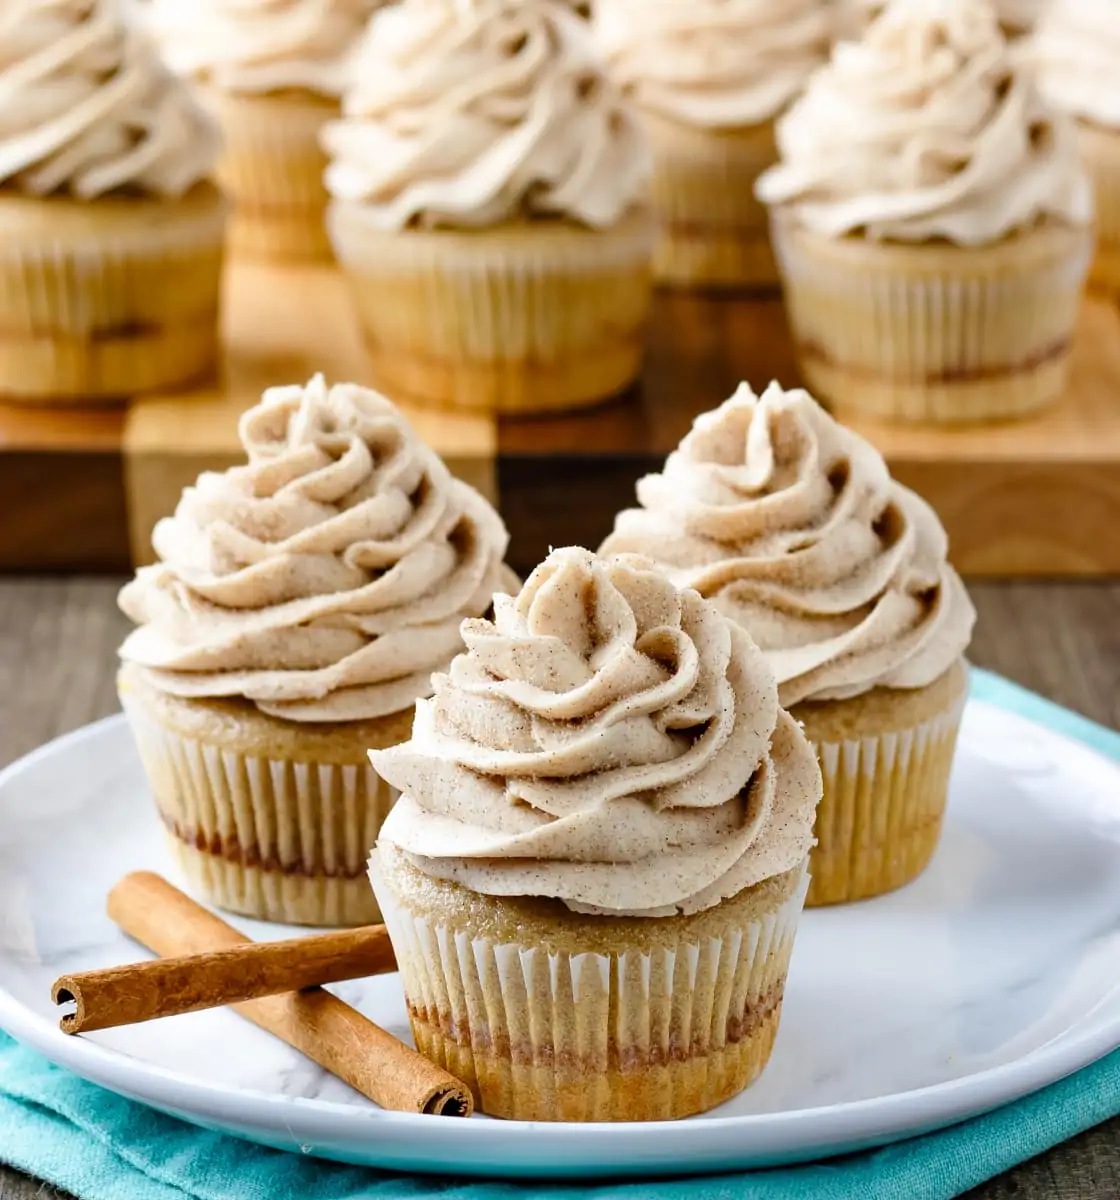 Cinnamon Cupcakes with Cinnamon Buttercream Frosting